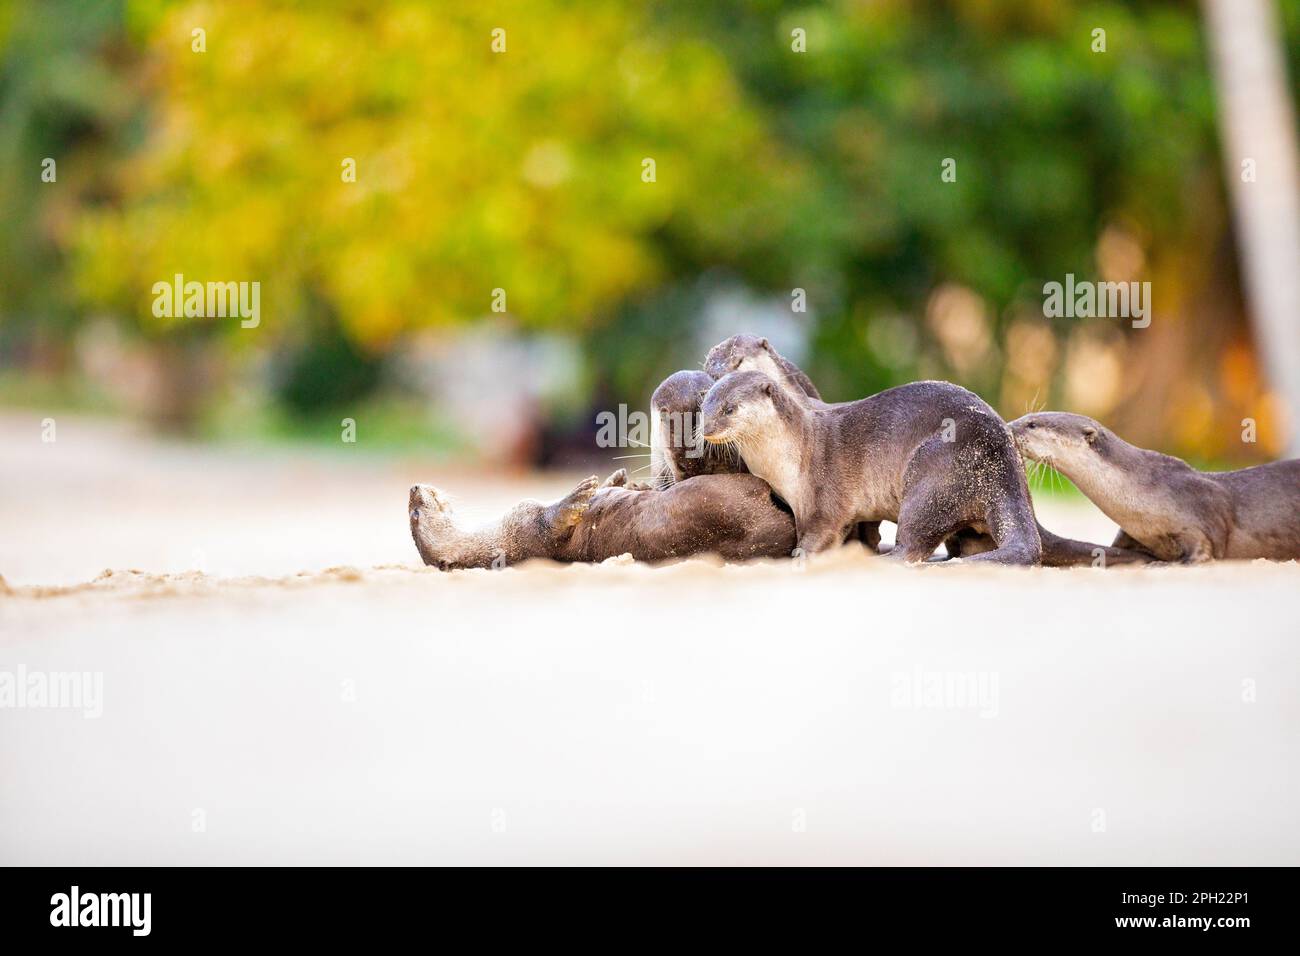 A family of smooth coated otters play on a sandy beach after resting, Singapore Stock Photo